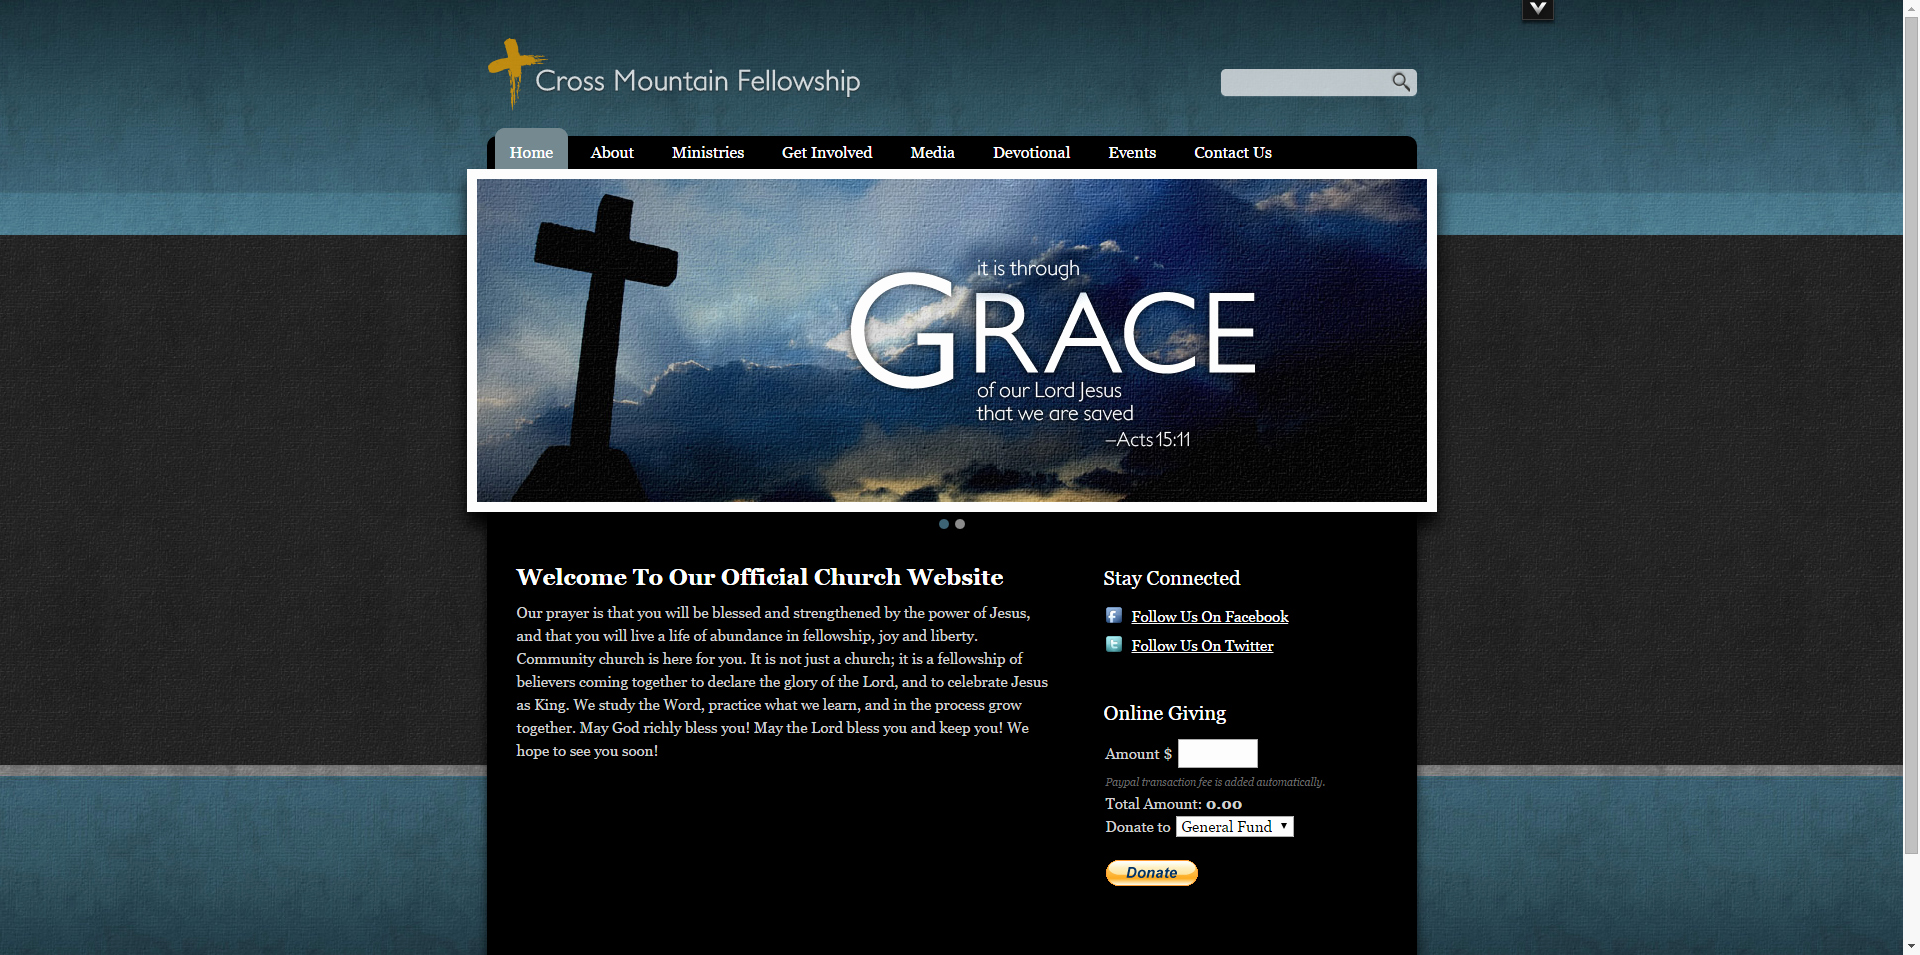 Video Background Website Template Unique 30 Best Church Website Templates for Ministry and Outreach